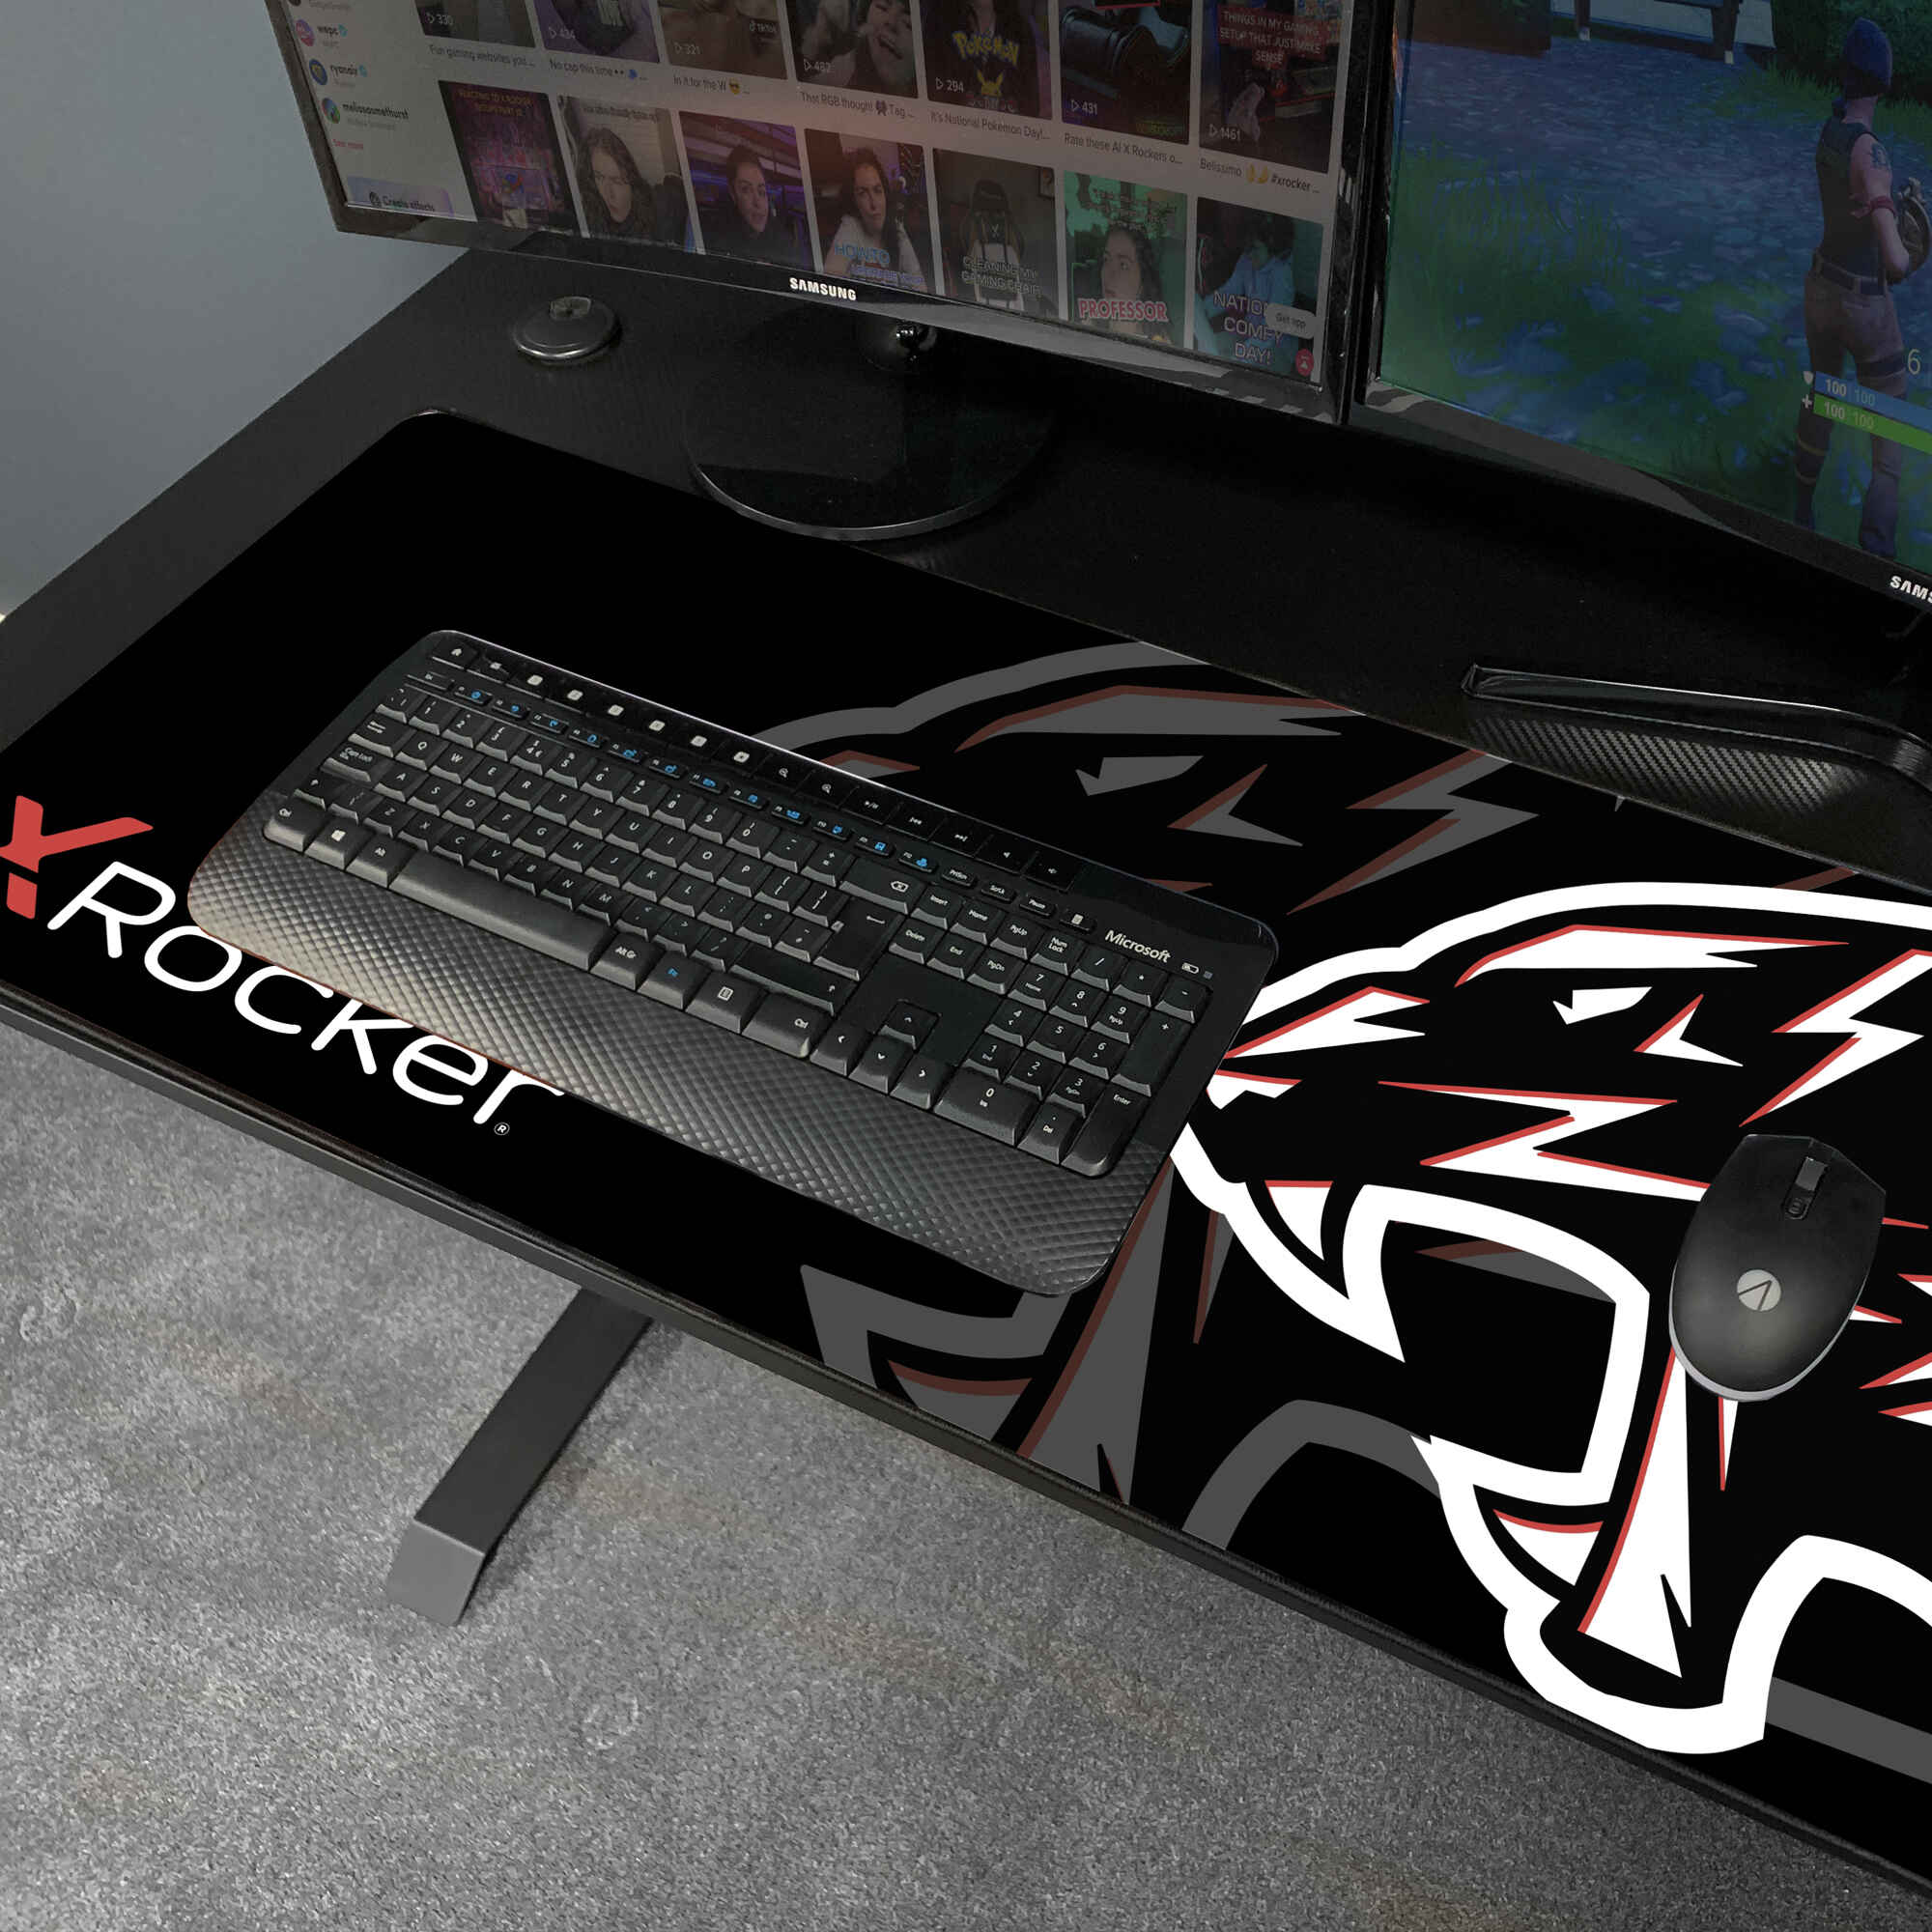 Free X Rocker mouse mat included with each desk